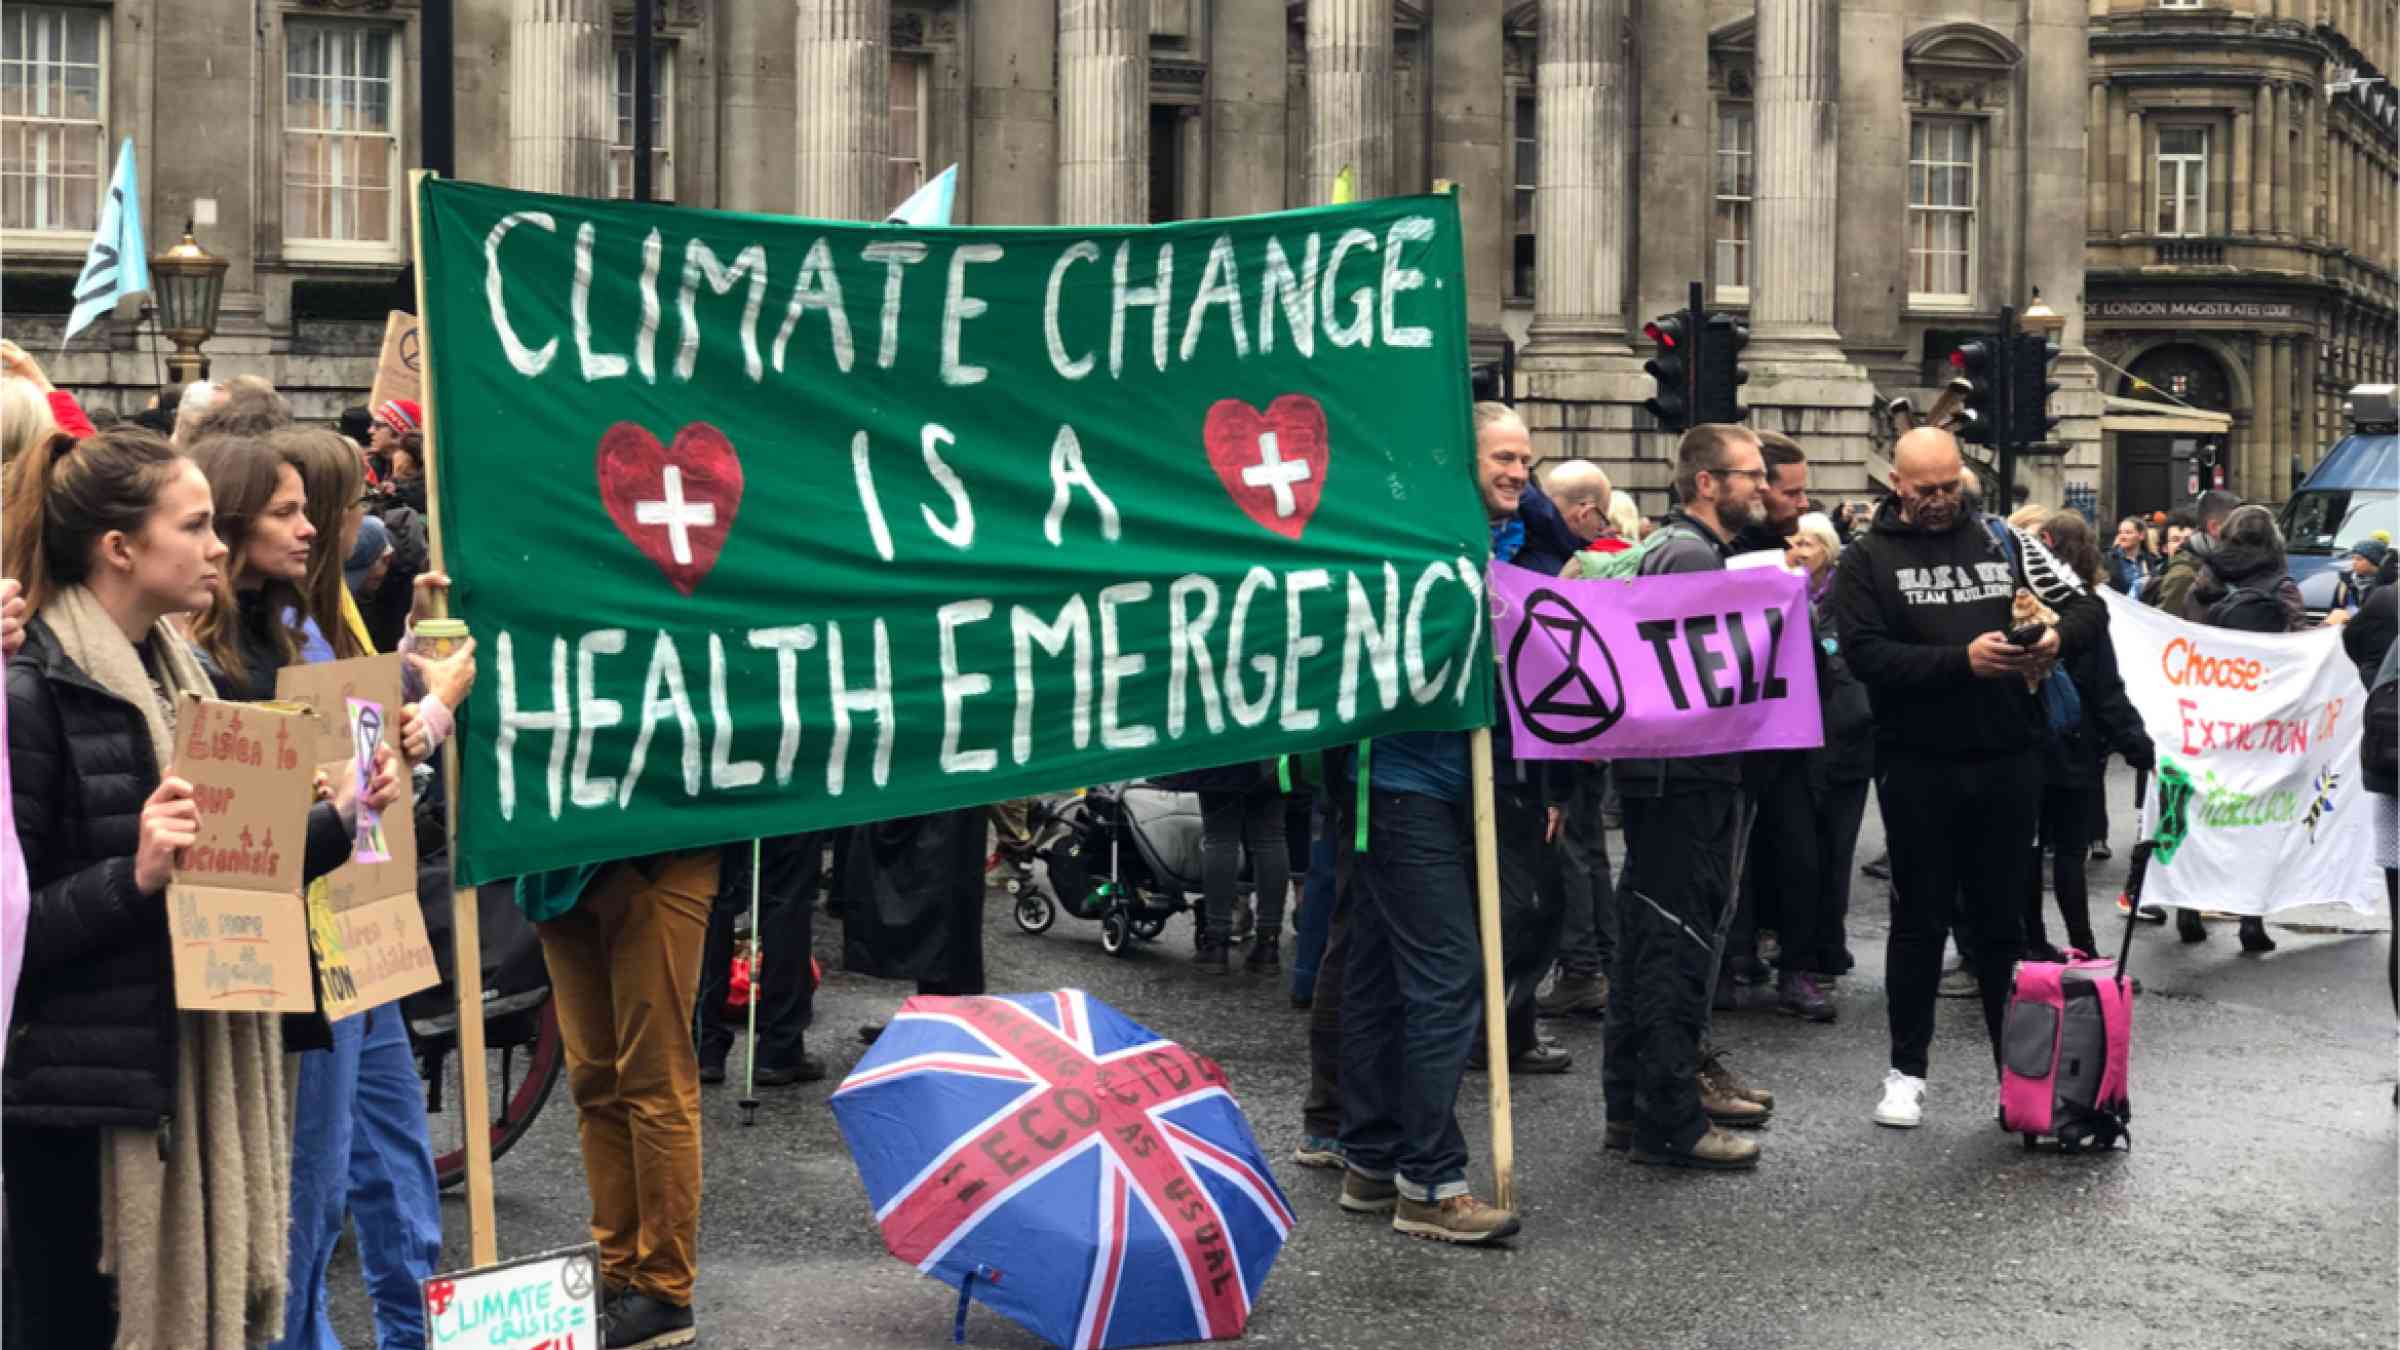 The Extinction Rebellion protesting climate change while occupying Bank, London with a sign reading "Climate Change is a Health Emergency"